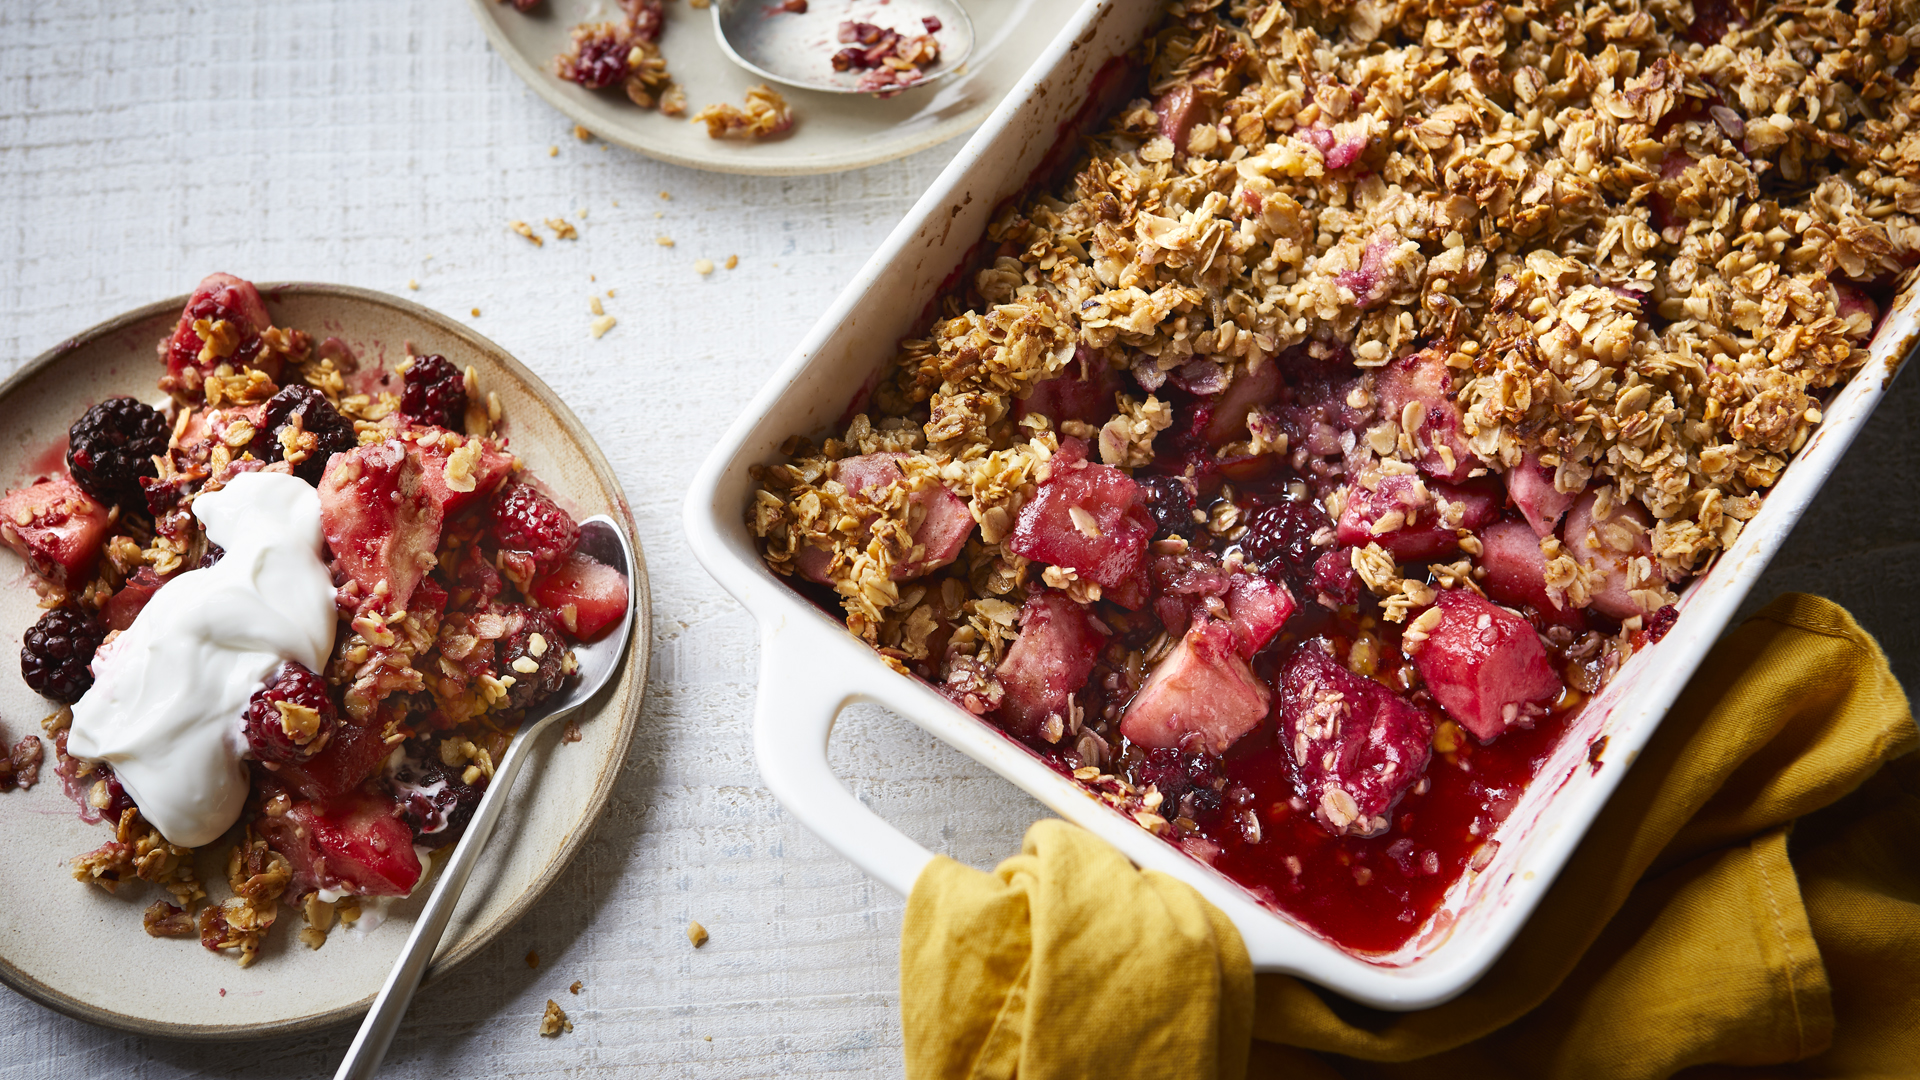 https://food-images.files.bbci.co.uk/food/recipes/healthy_apple_crumble_30931_16x9.jpg